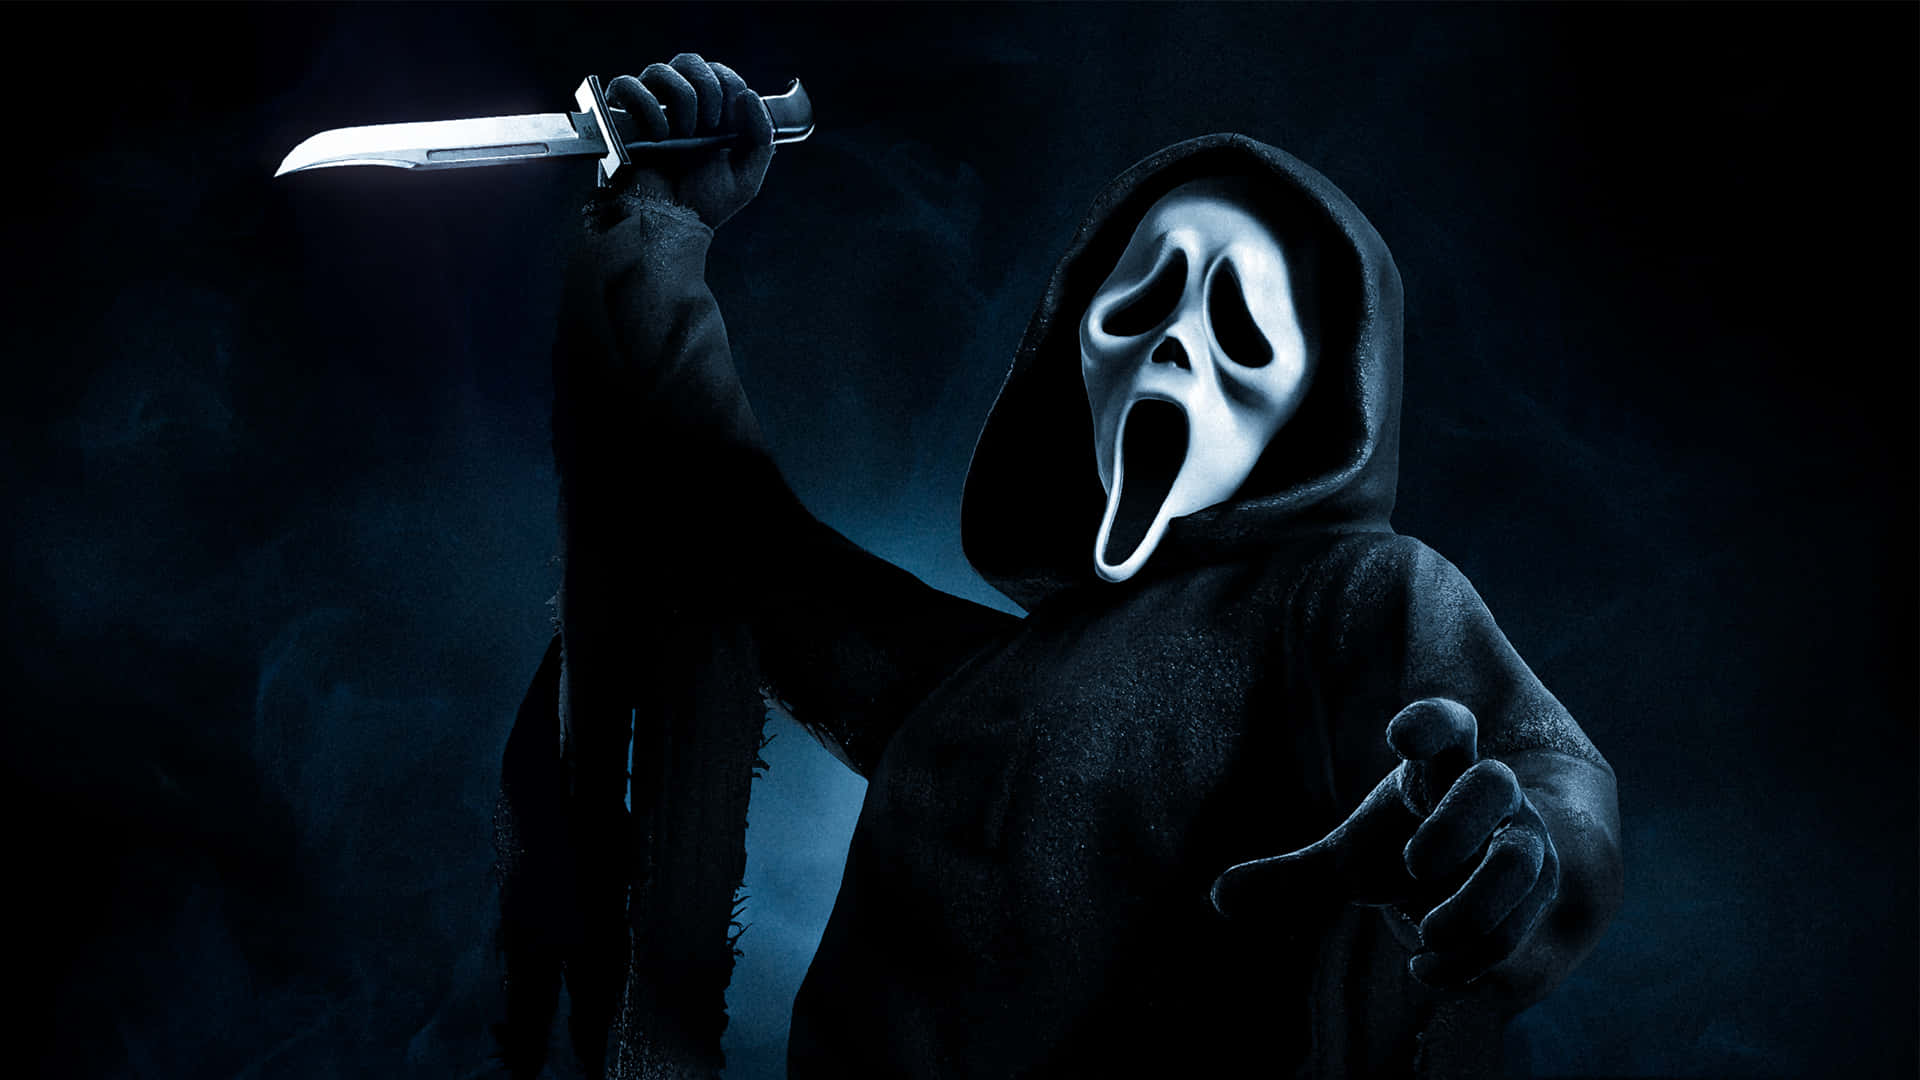 Ghostface stands menacingly atop a mountain of horror movies